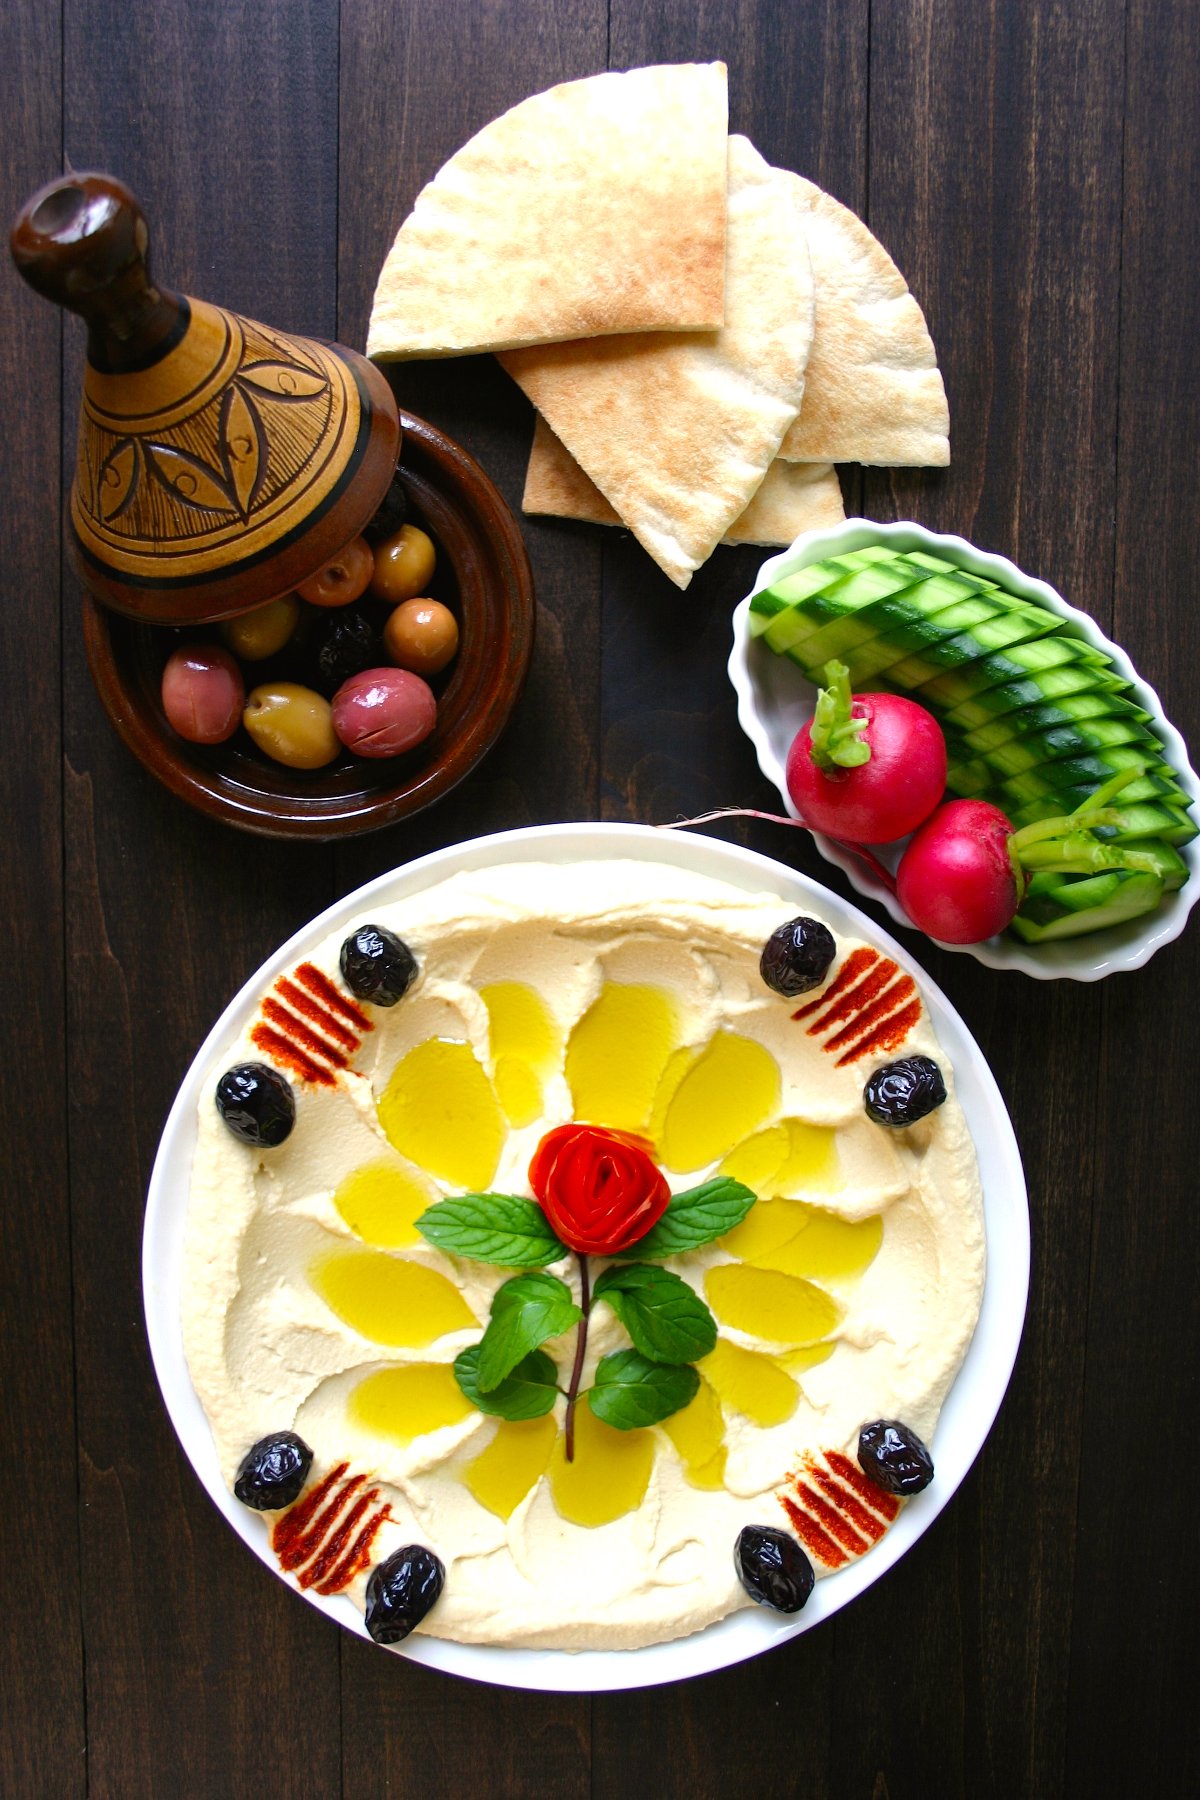 A simple recipe for an authentic, Basic Hummus. Creamy and satisfying, this hummus is perfect as an anytime snack and also makes great party food.